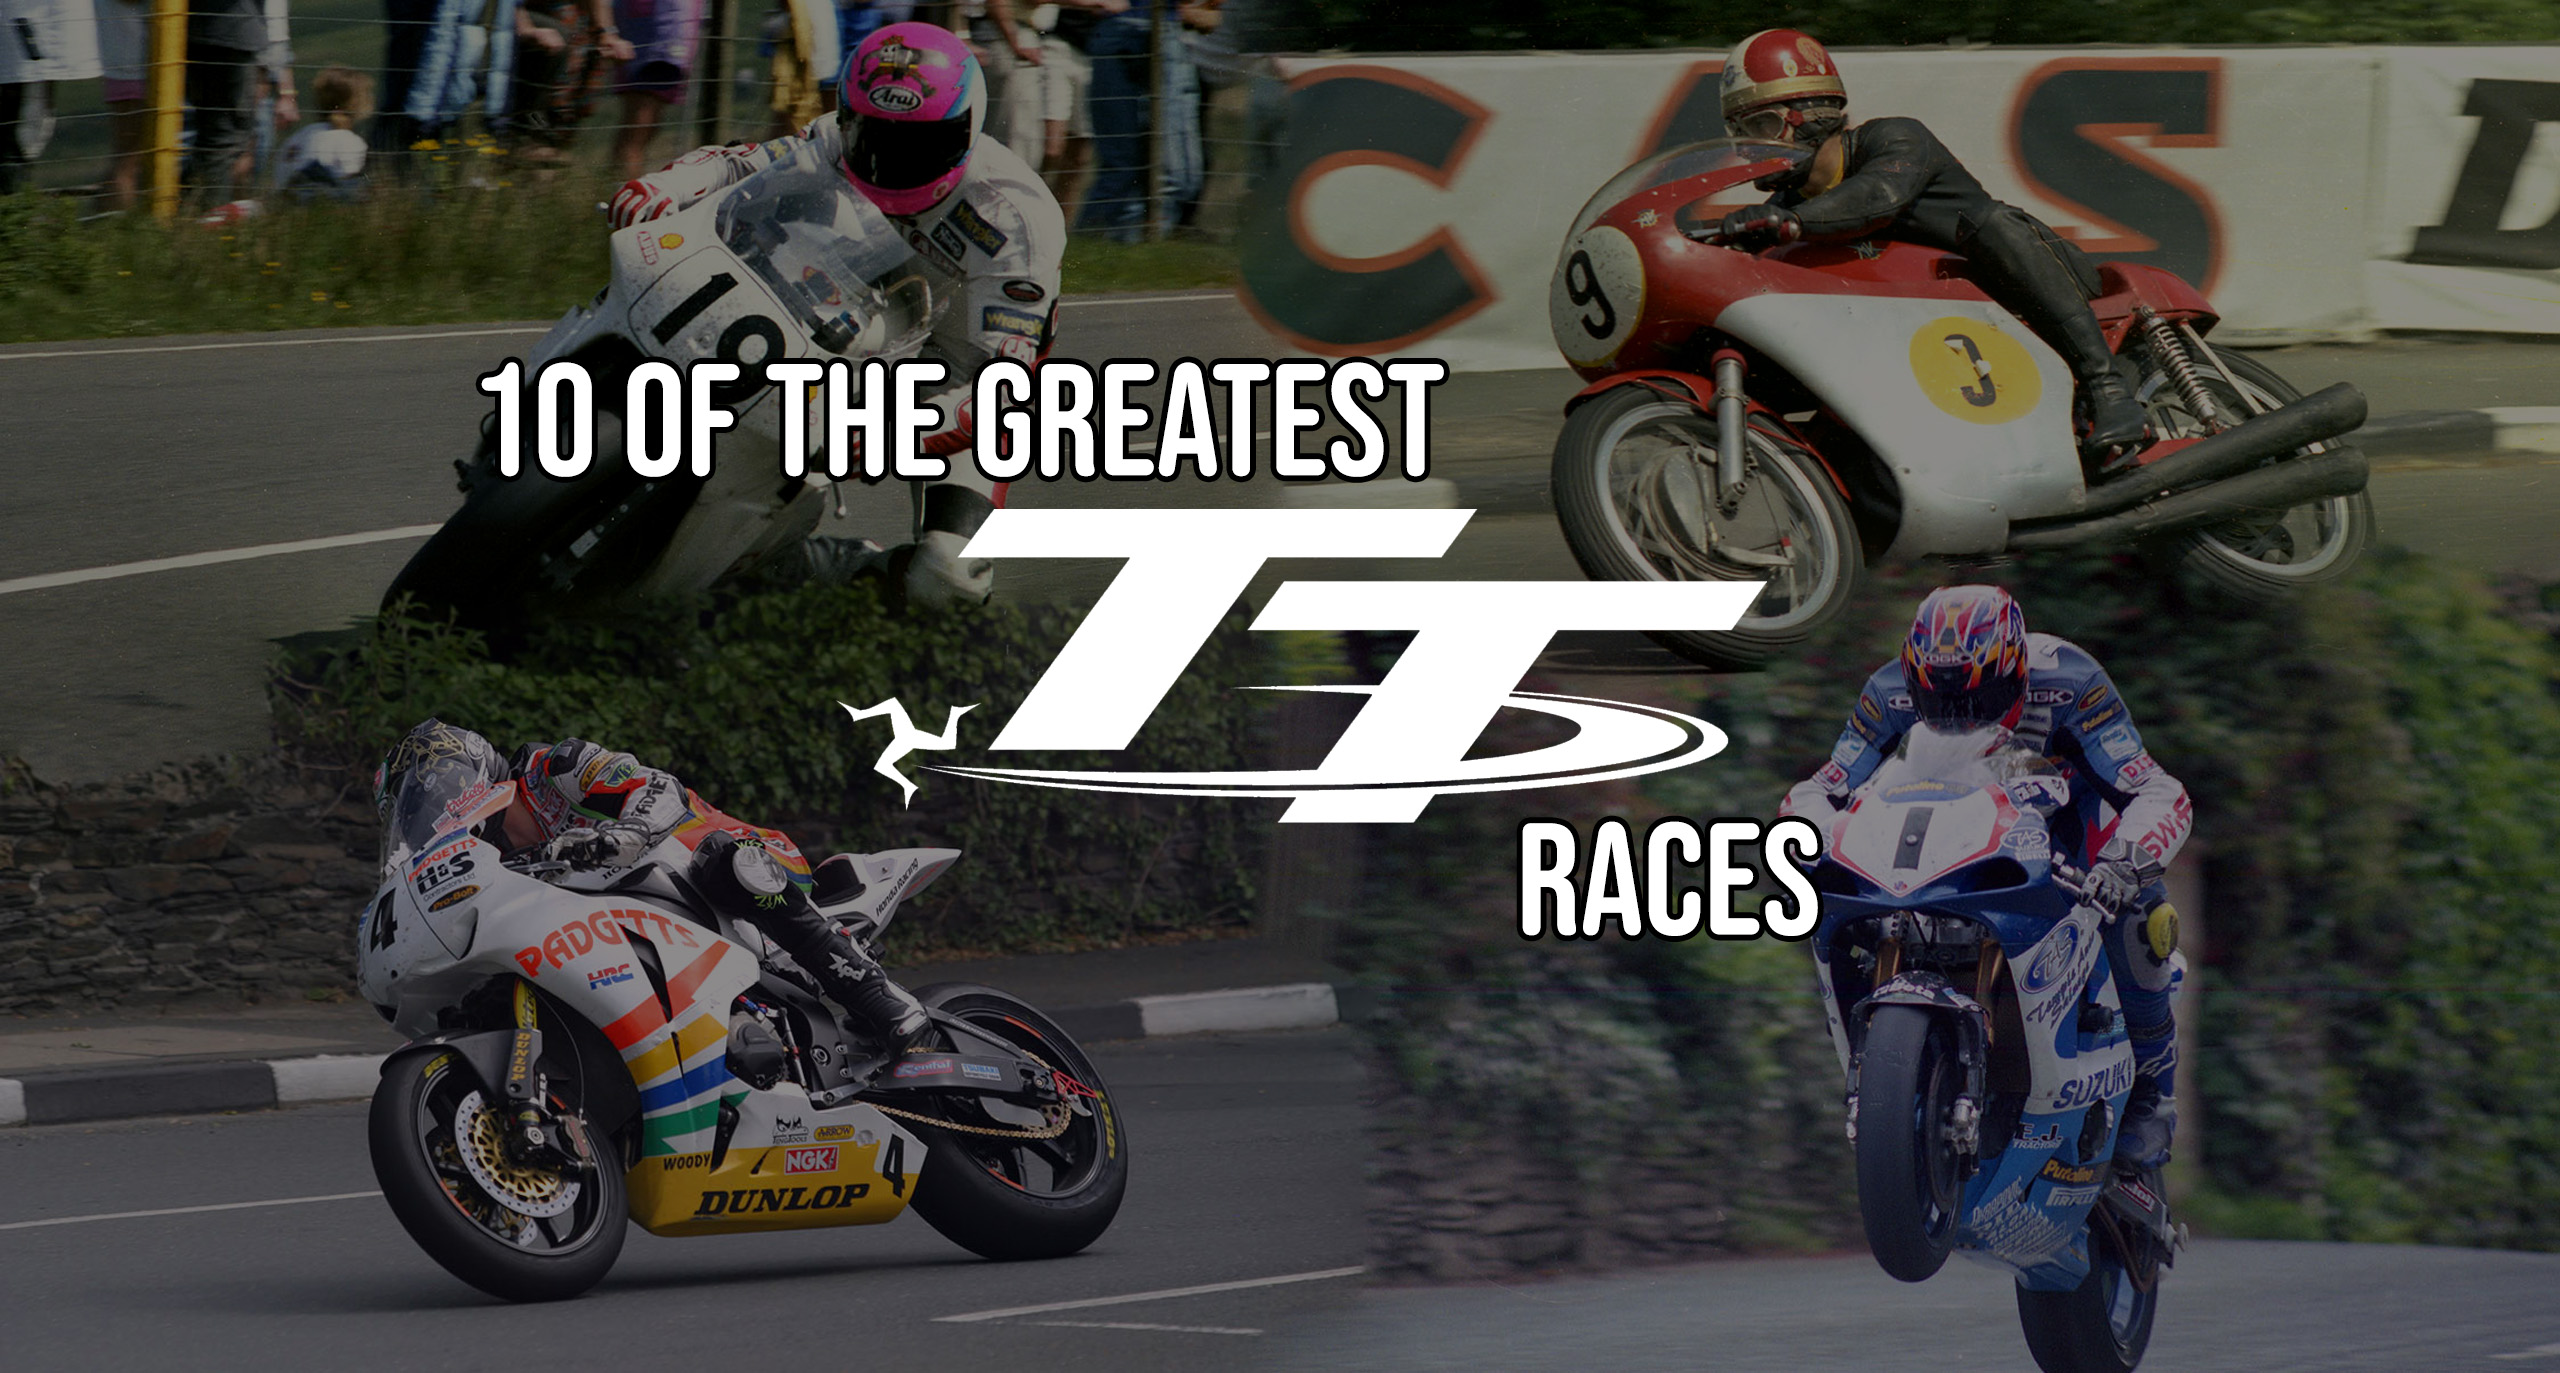 The 10 Greatest Isle of Man TT Races in History